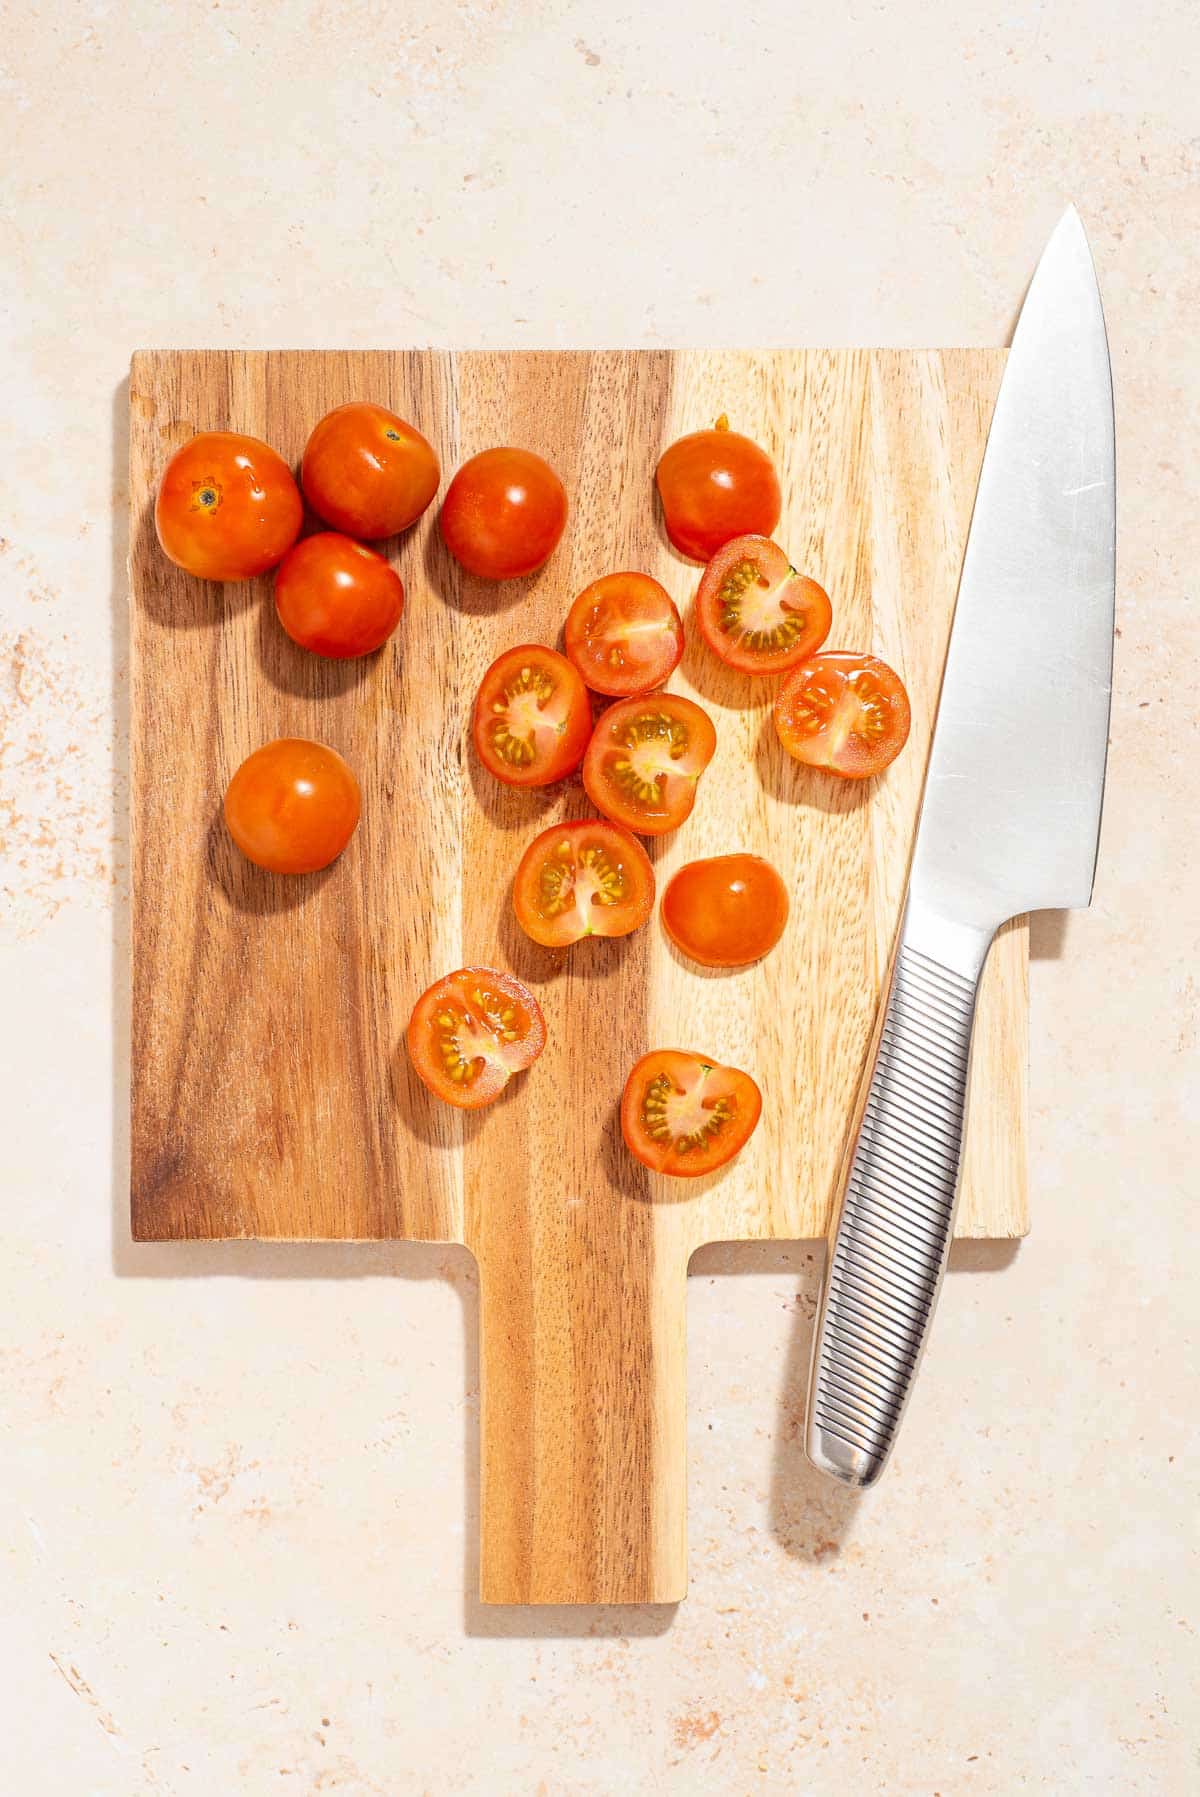 A cutting board with tomatoes and a knife.